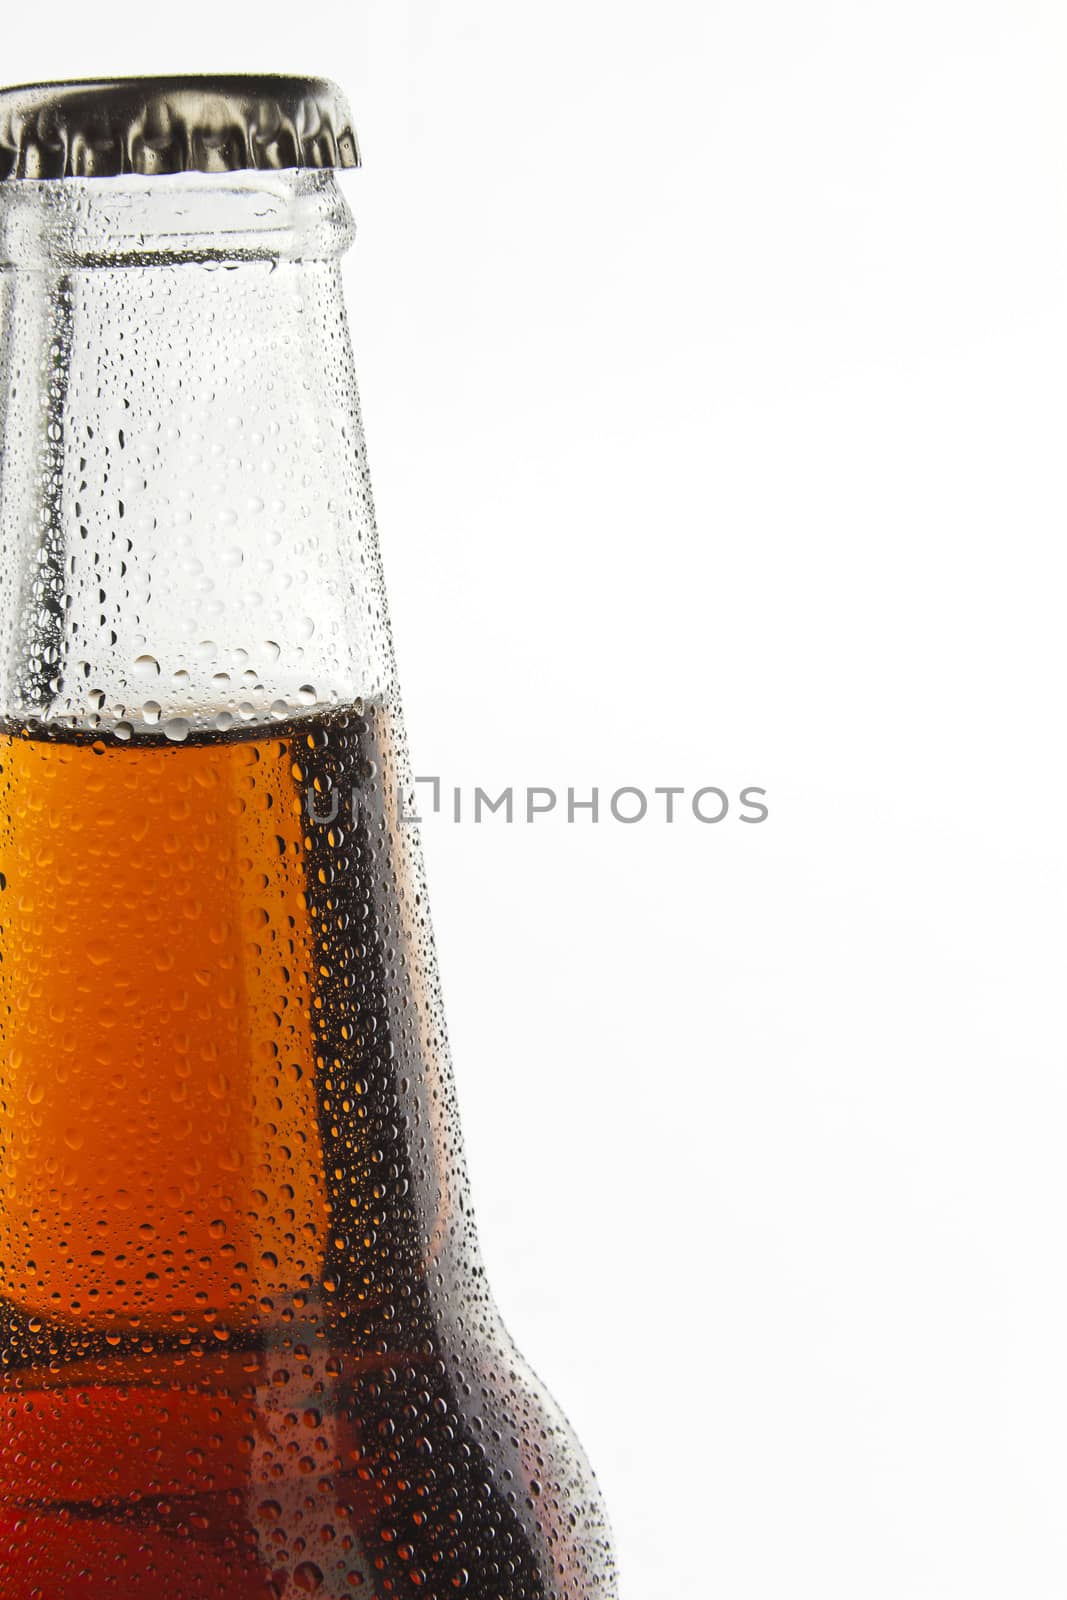 Soda bottle light non-alcoholic drink with water drops